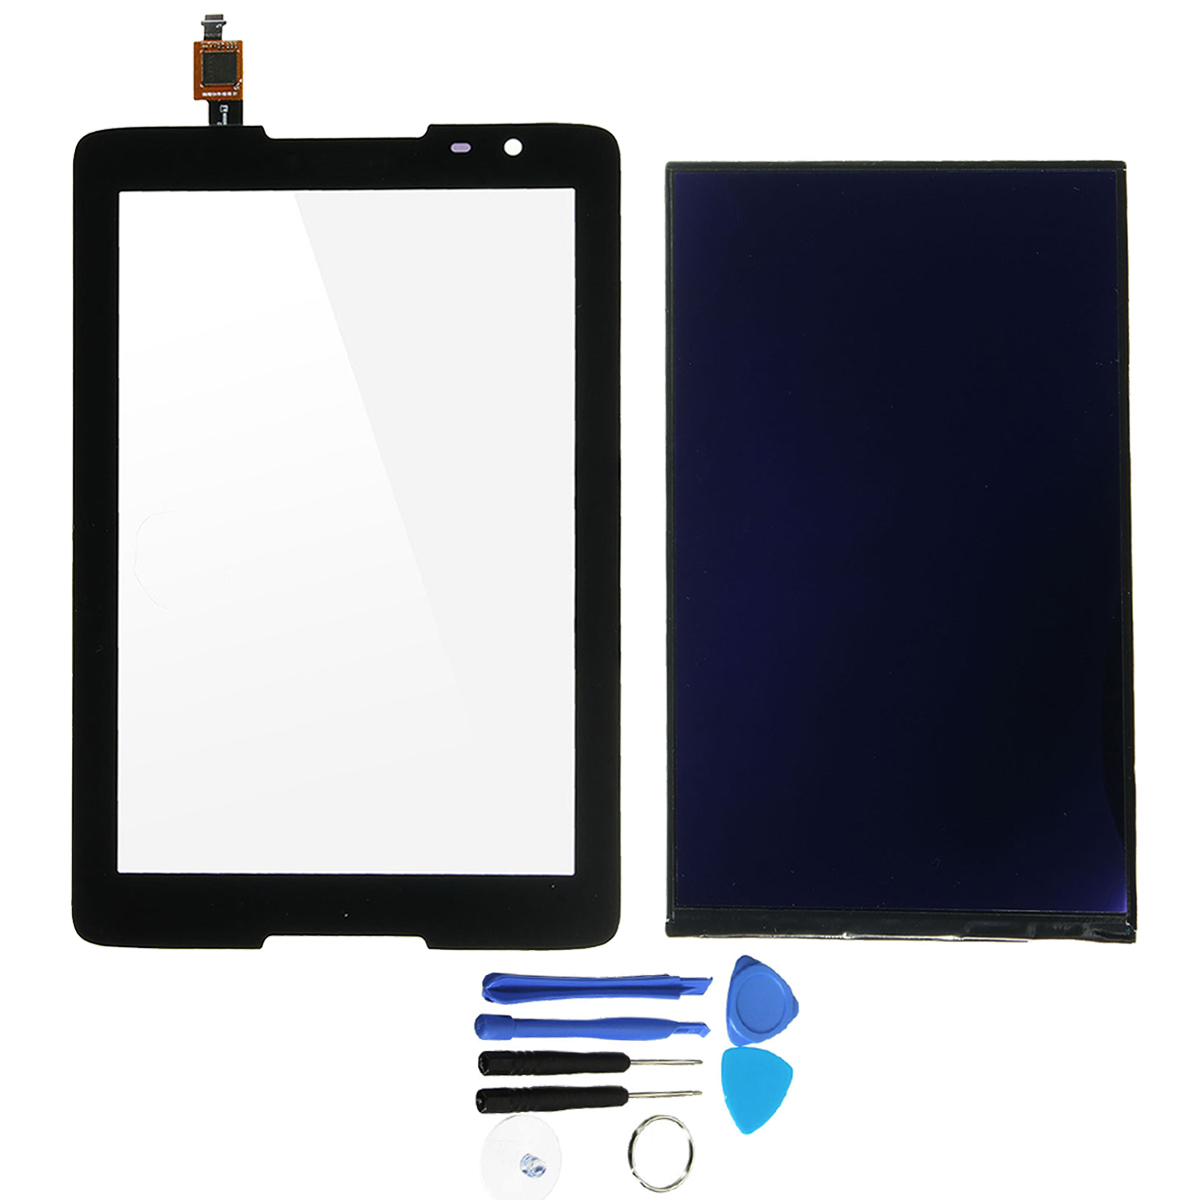 

Touch Screen Digitizer + LCD Display With Tools Replacement For Lenovo IdeaTab A8-50 A5500 A5500F 8"